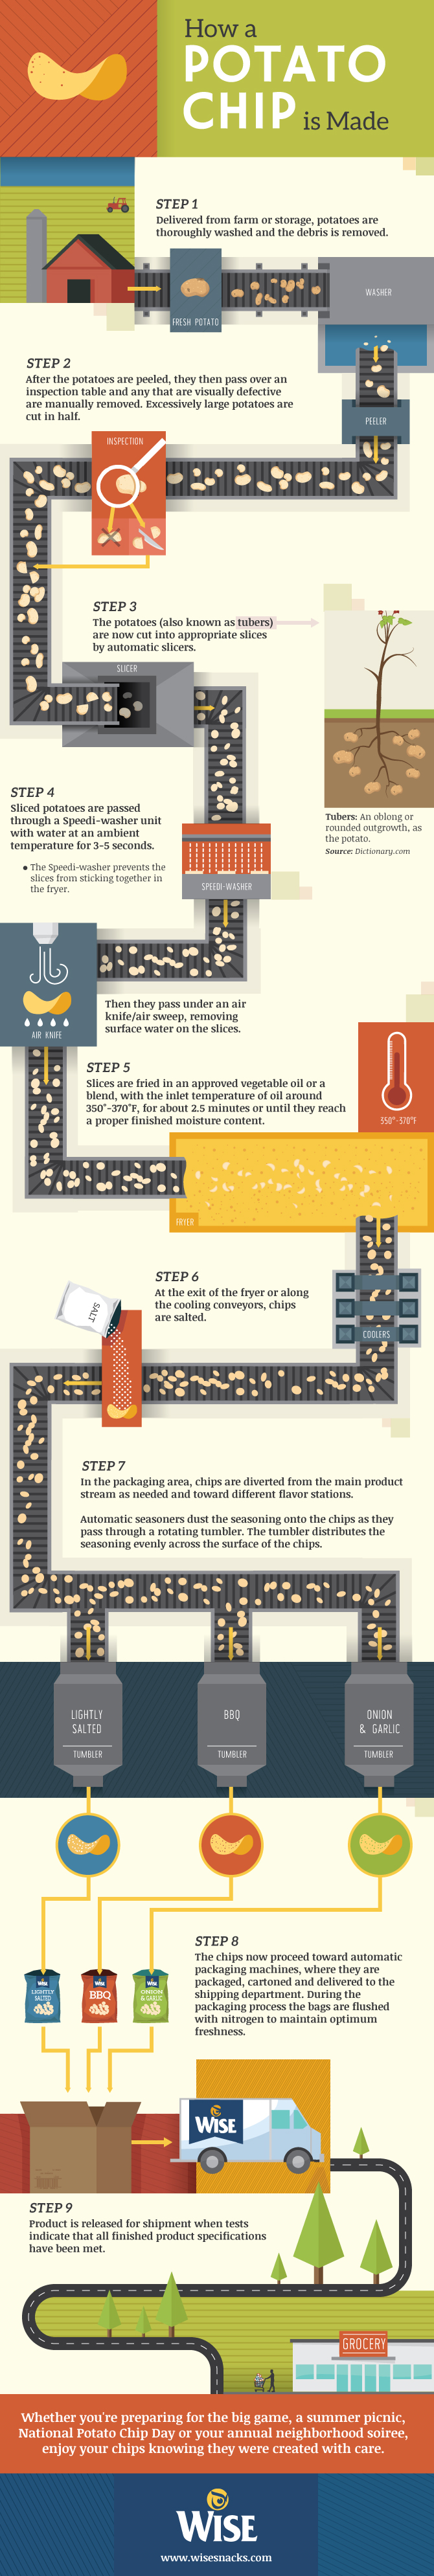 An Infographic About How Crisps Are Made